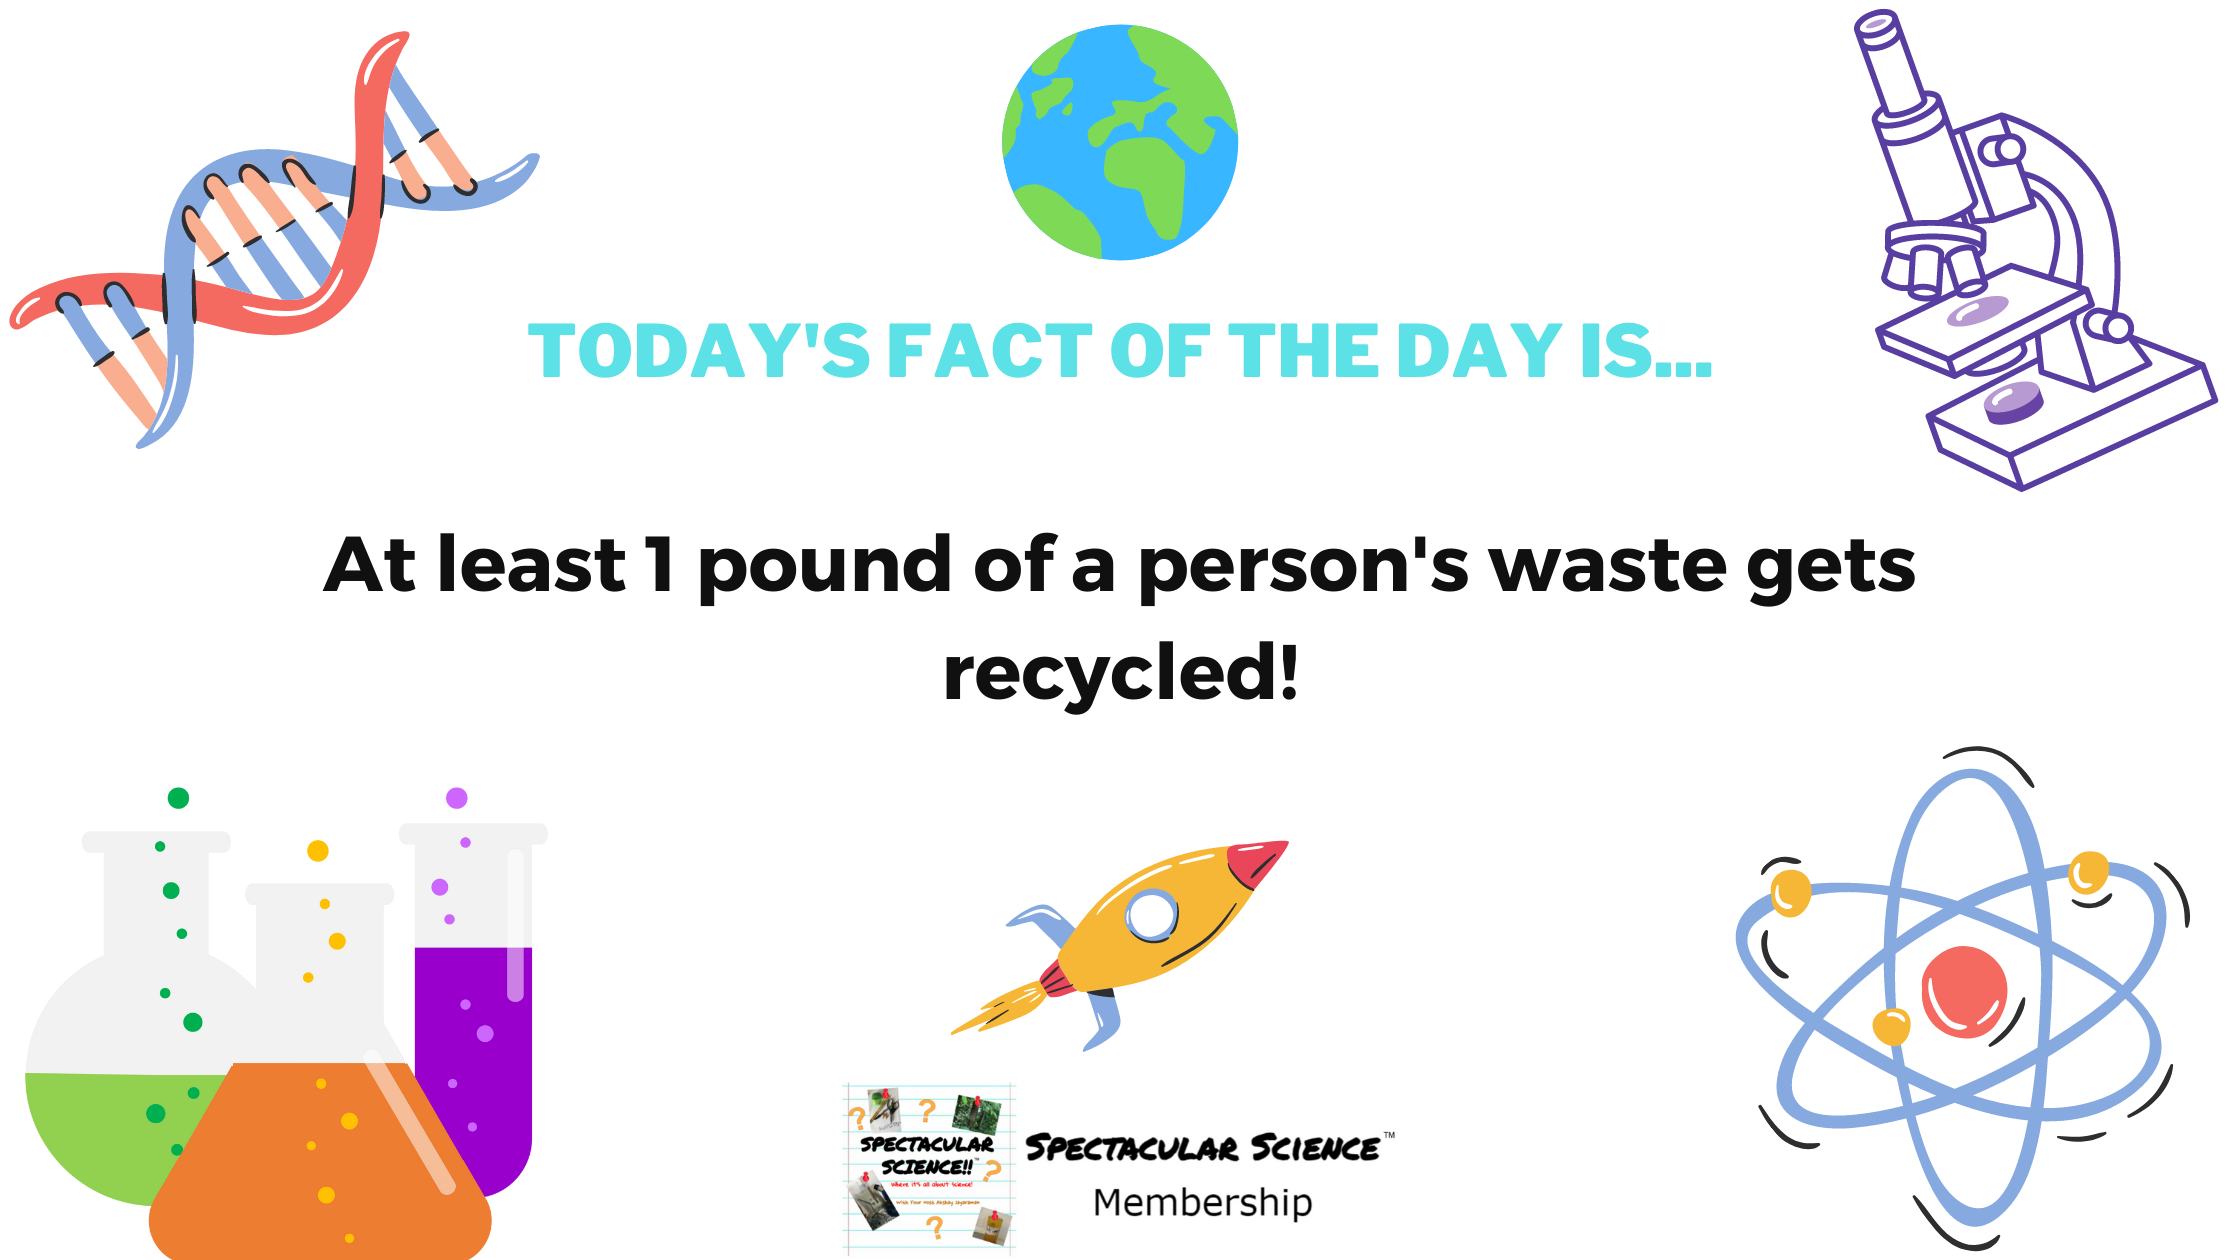 Fact of the Day Image July 9th